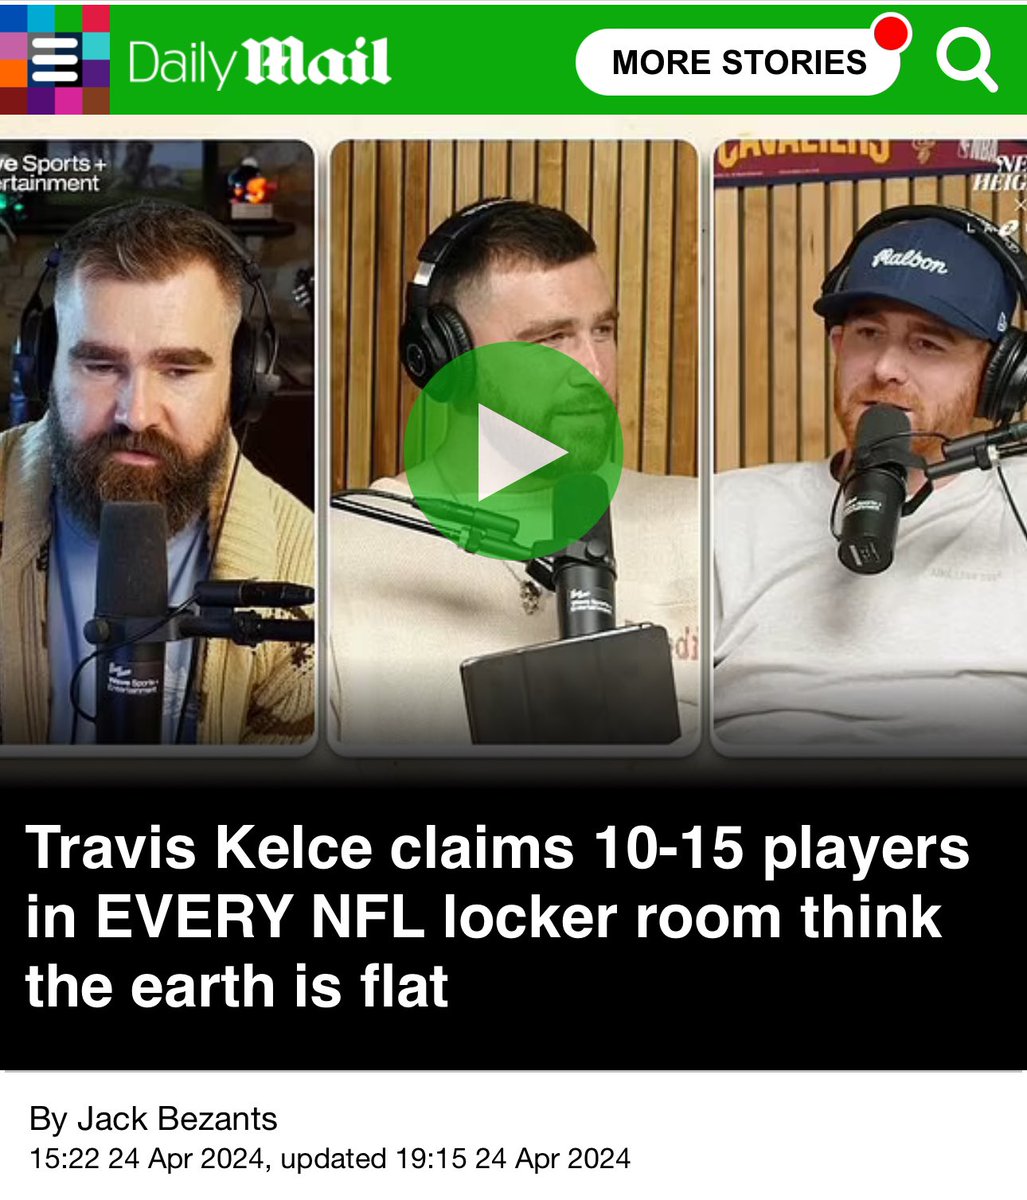 Travis Kelce claims 10-15 players in *every NFL locker room* know that earth is flat! Your. ball. is. deeeeeead. ☠️